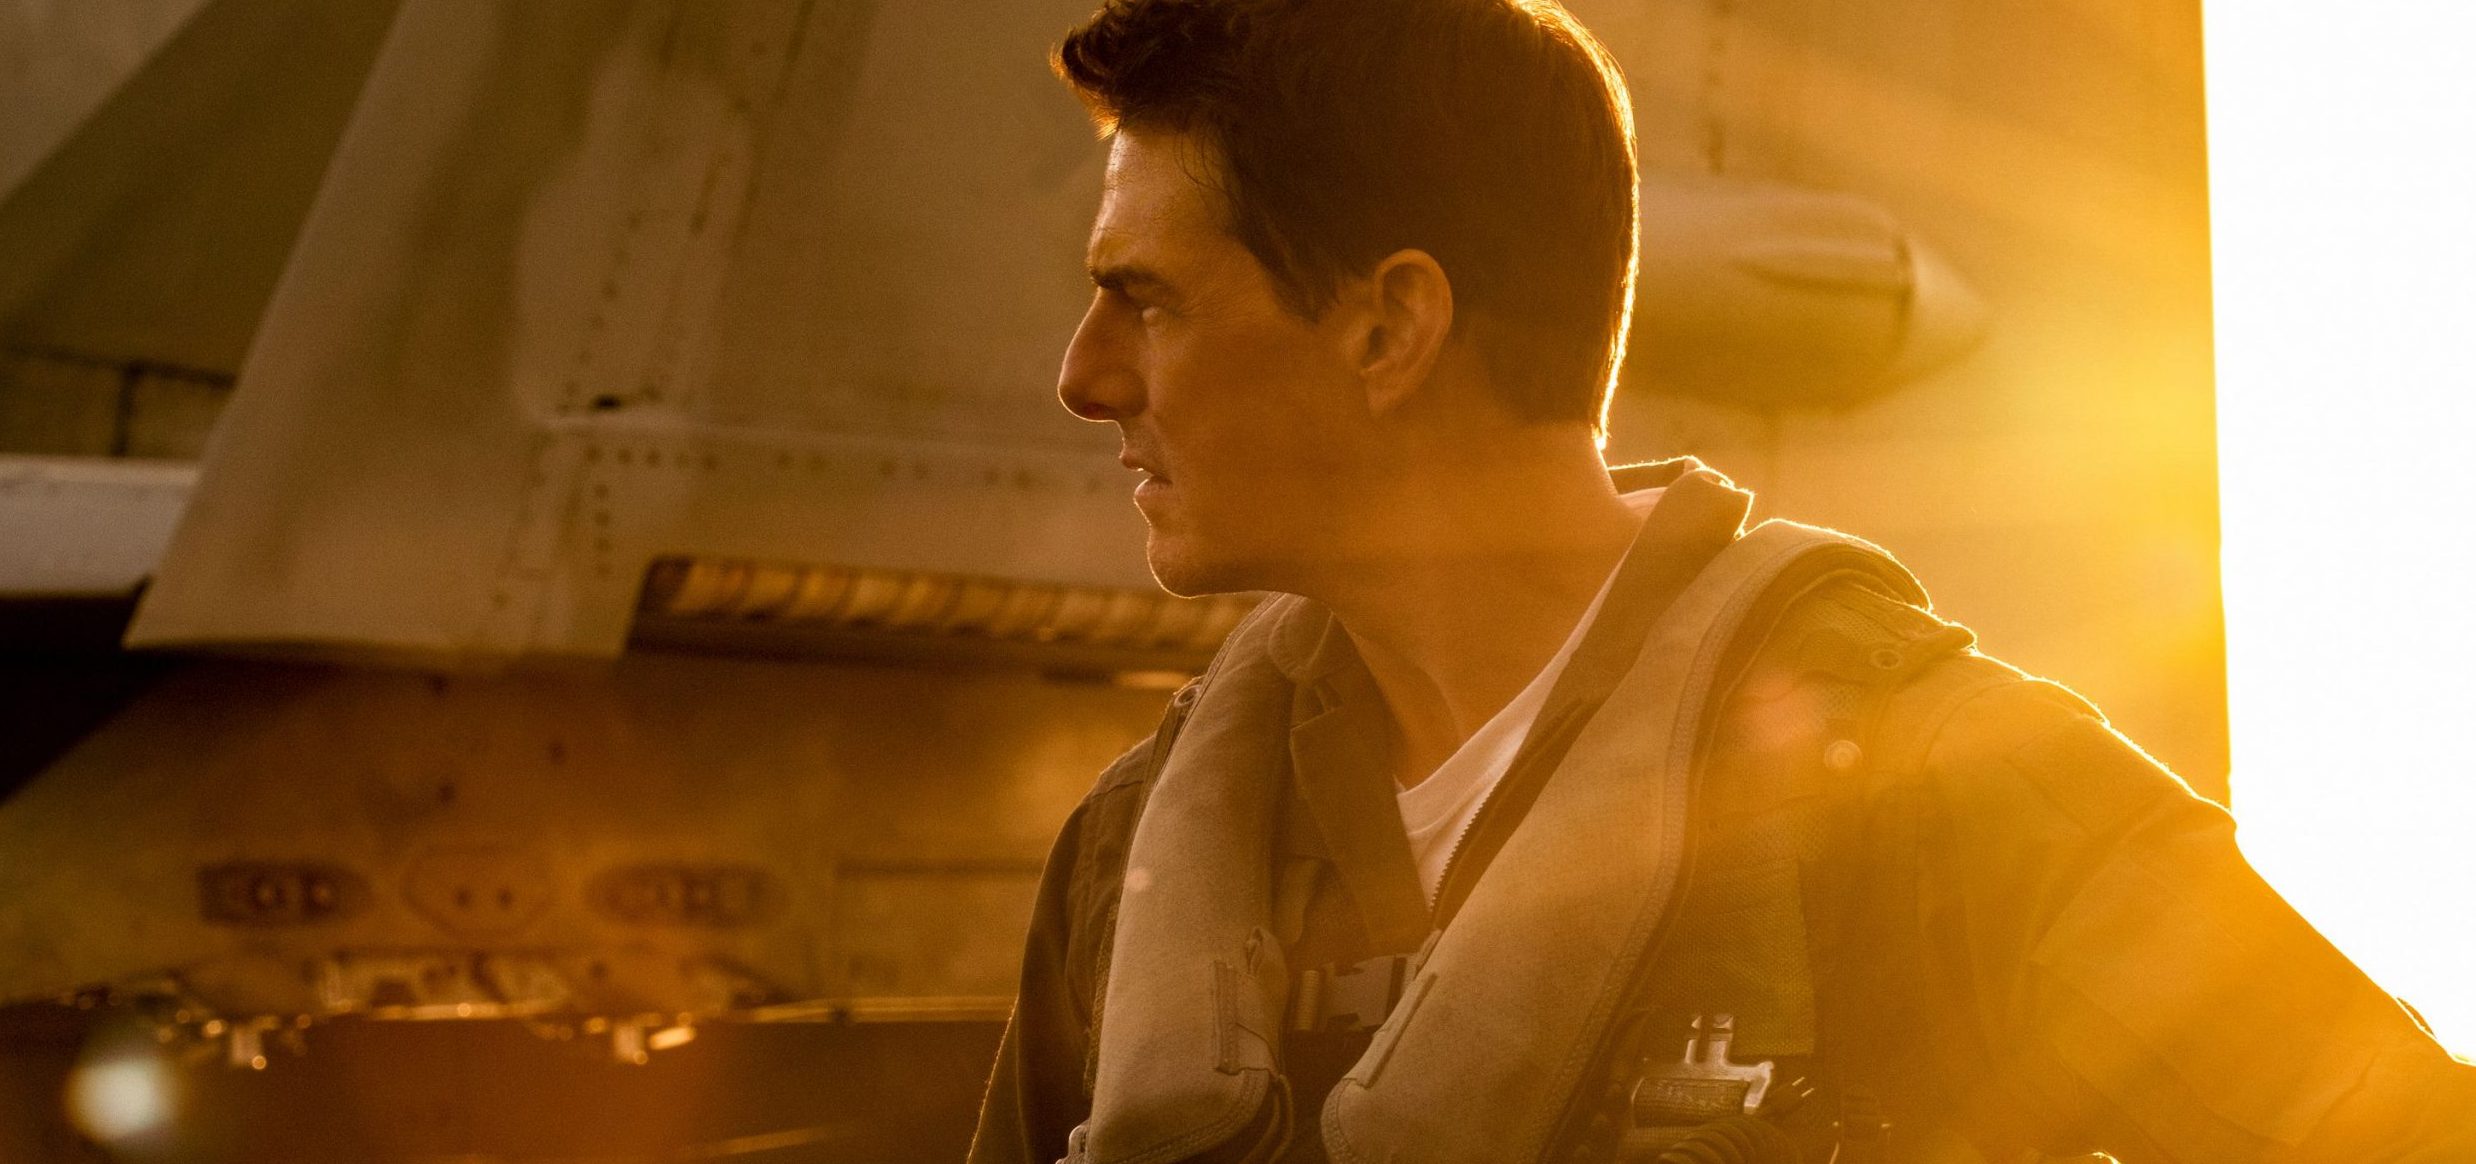 Mission: Impossible Sequels and Top Gun: Maverick get new release dates